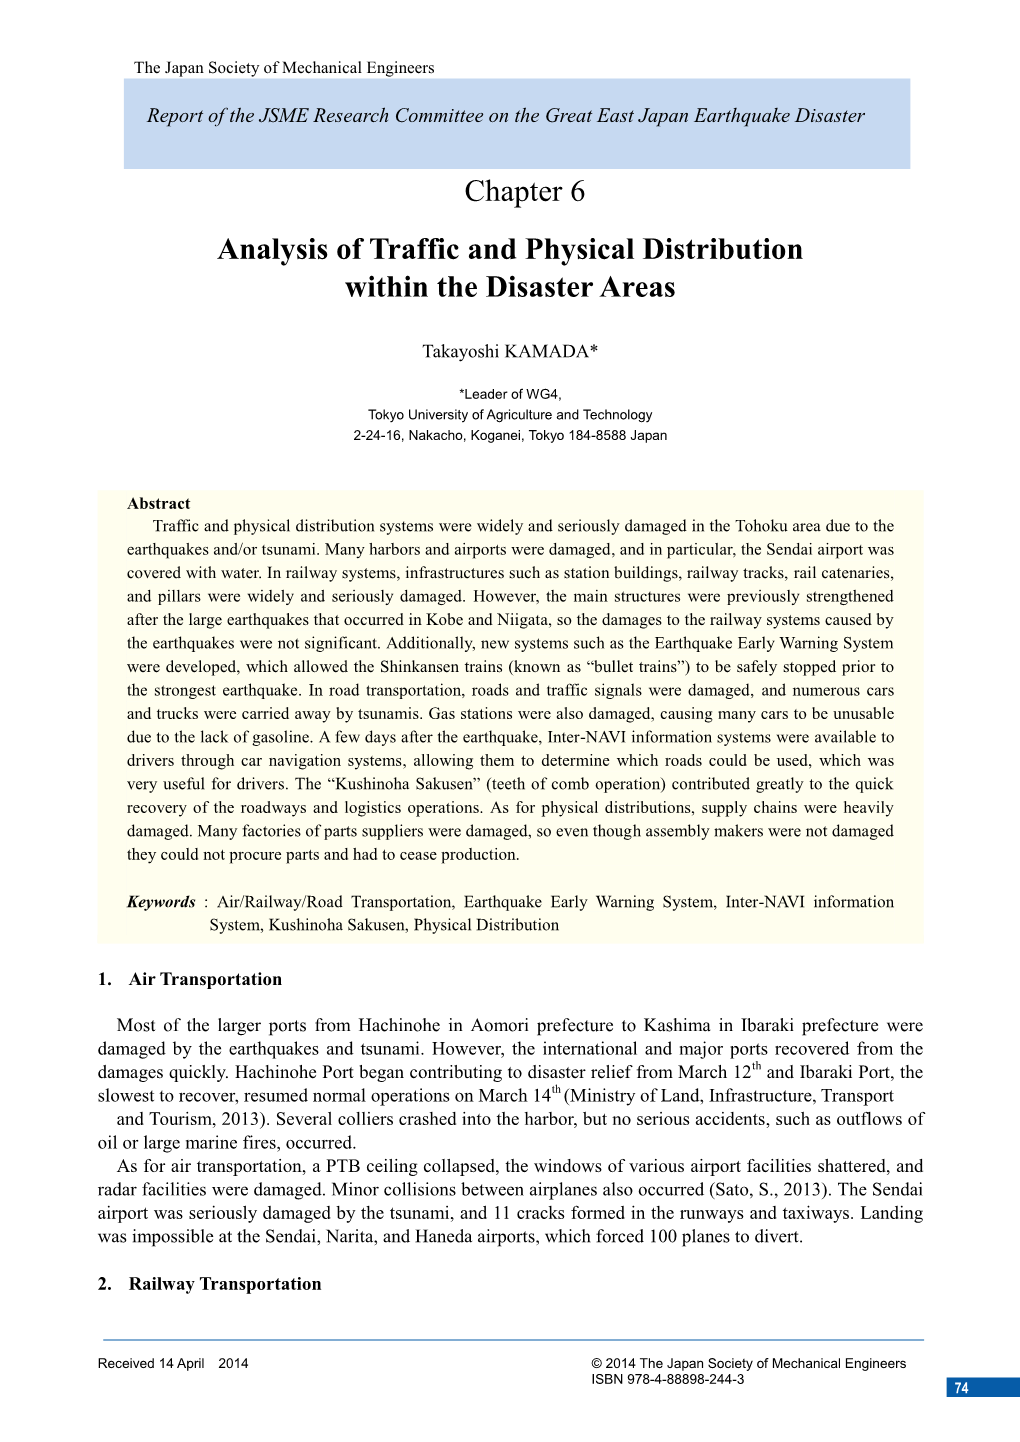 Chapter 6 Analysis of Traffic and Physical Distribution Within The